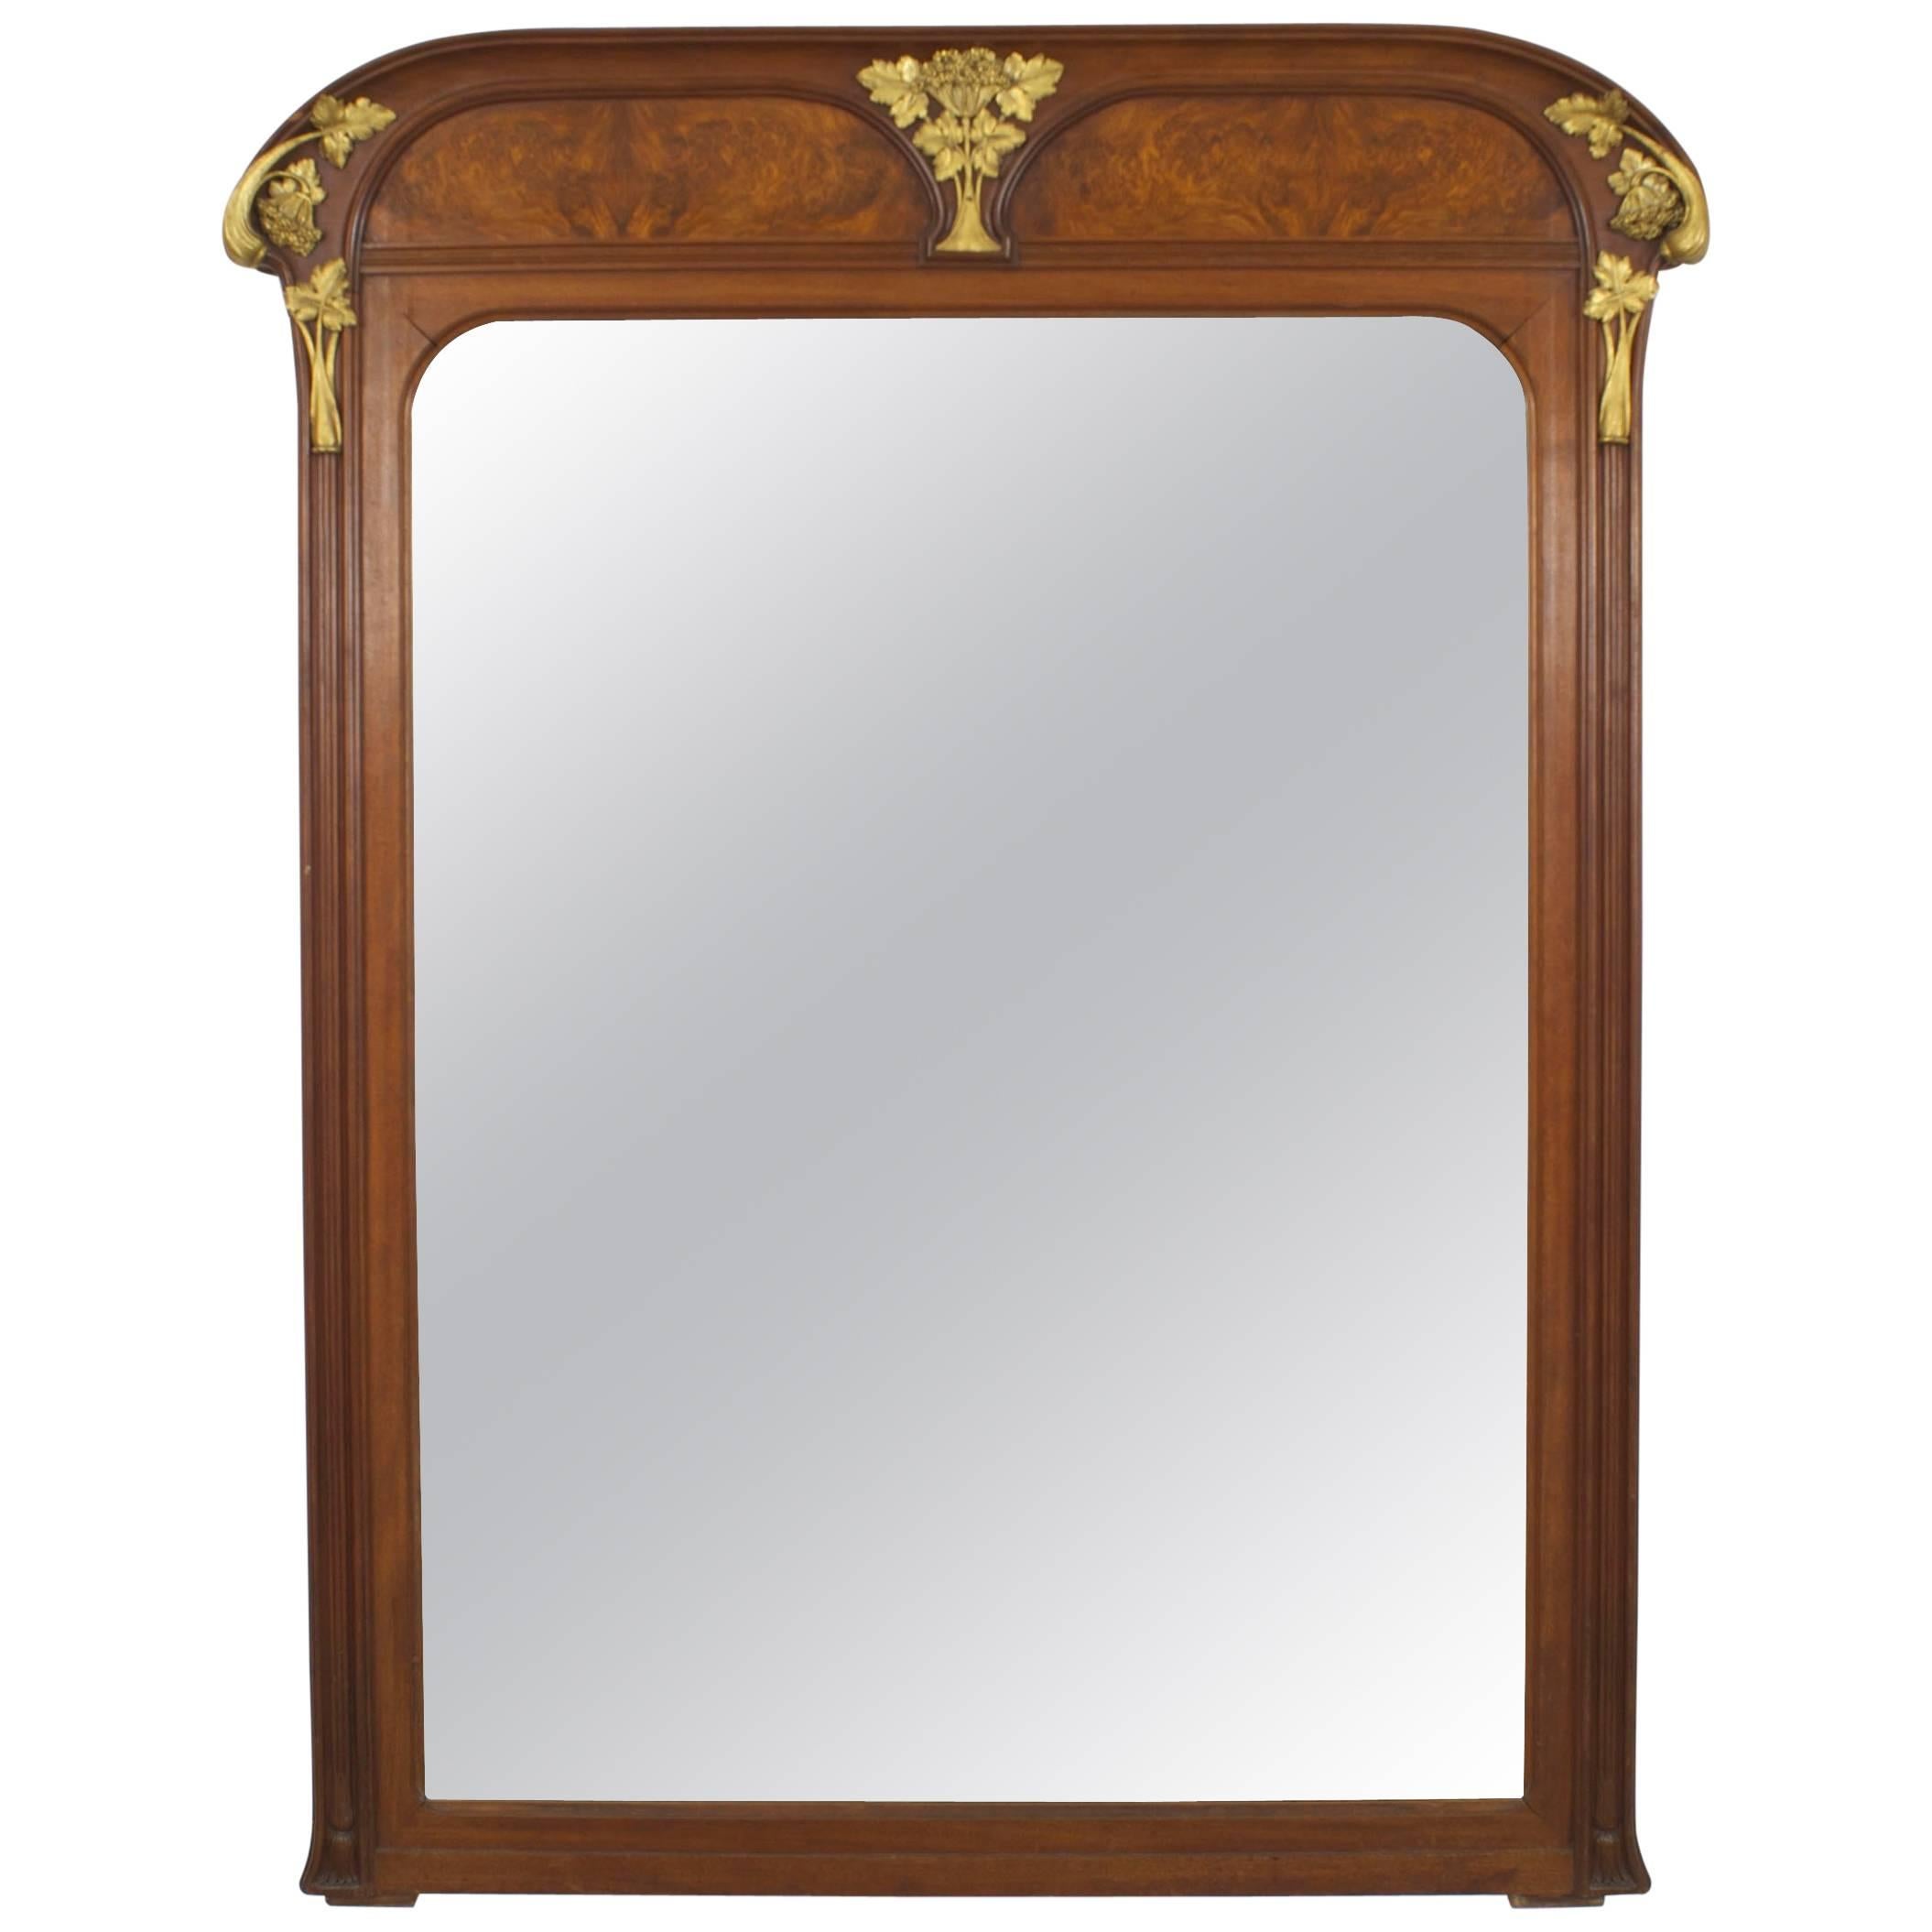 Louis Majorelle French Art Nouveau Walnut and Bronze Wall Mirror For Sale